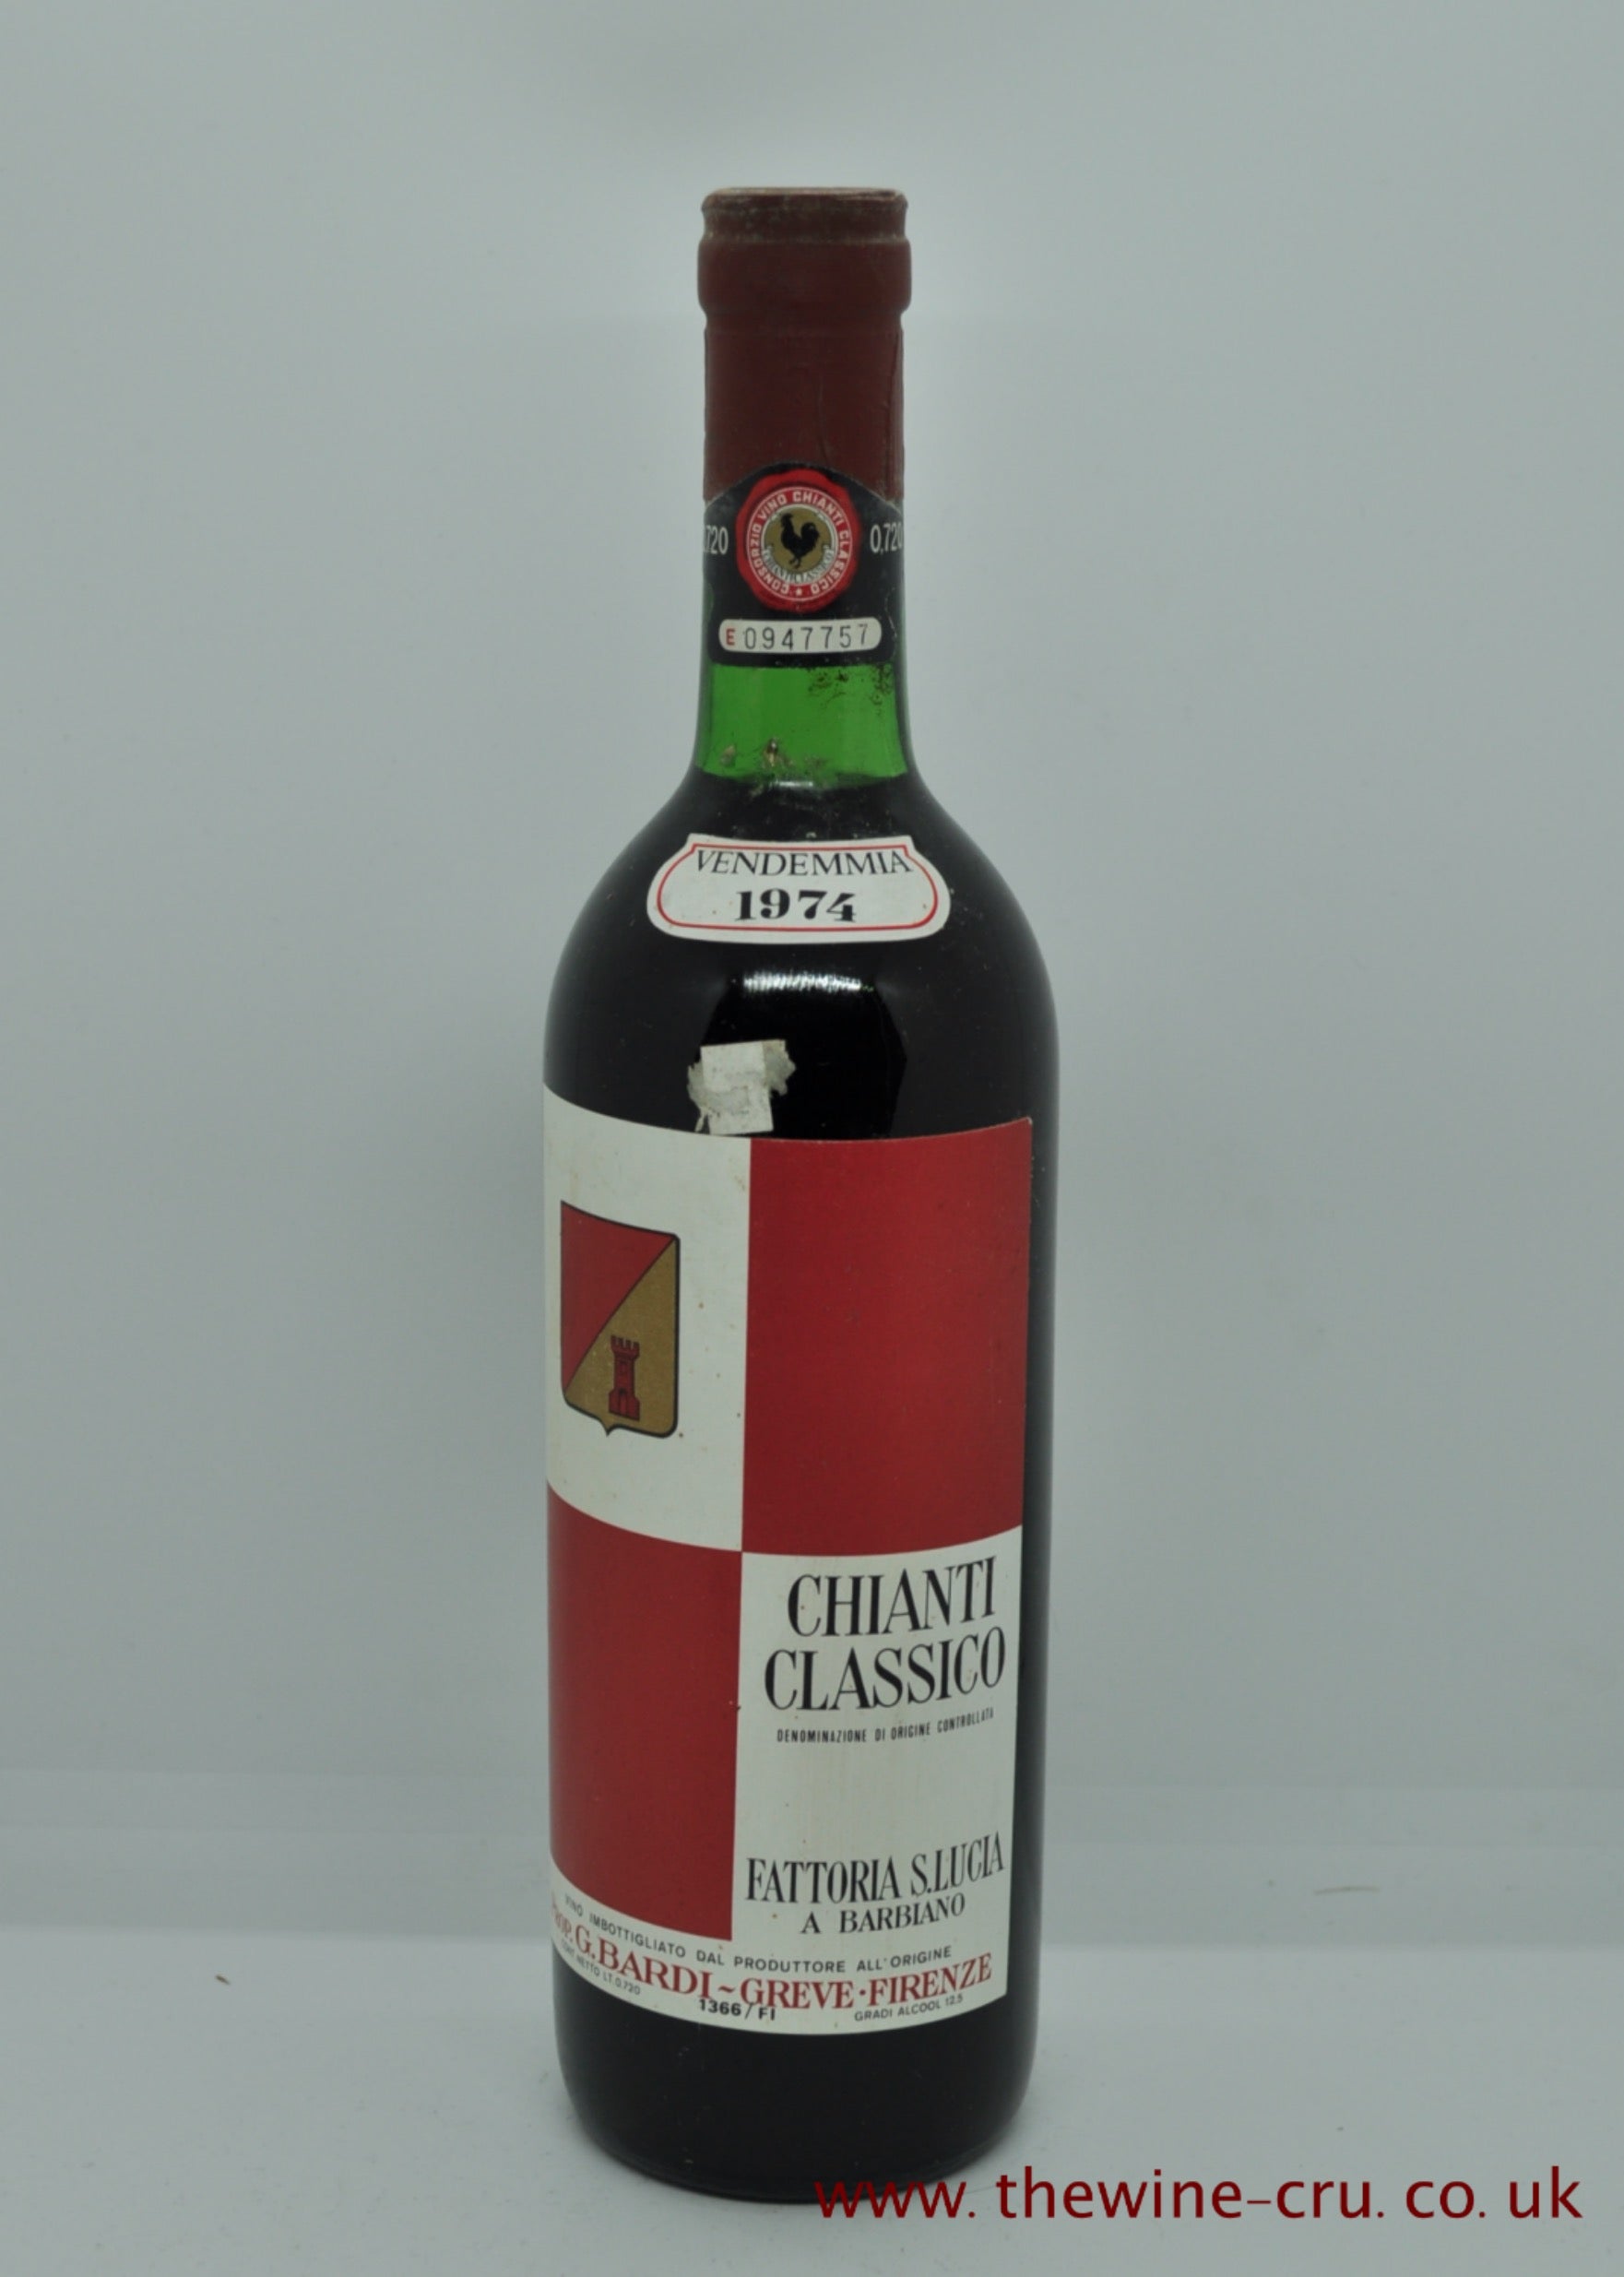 A bottle of 1974 vintage red wine. Chianti Classico Fattoria S Lucia A. Barbrano. Italy. The bottle is in good condition with the wine level being base of neck. Immediate delivery. Free local delivery. Gift wrapping available.